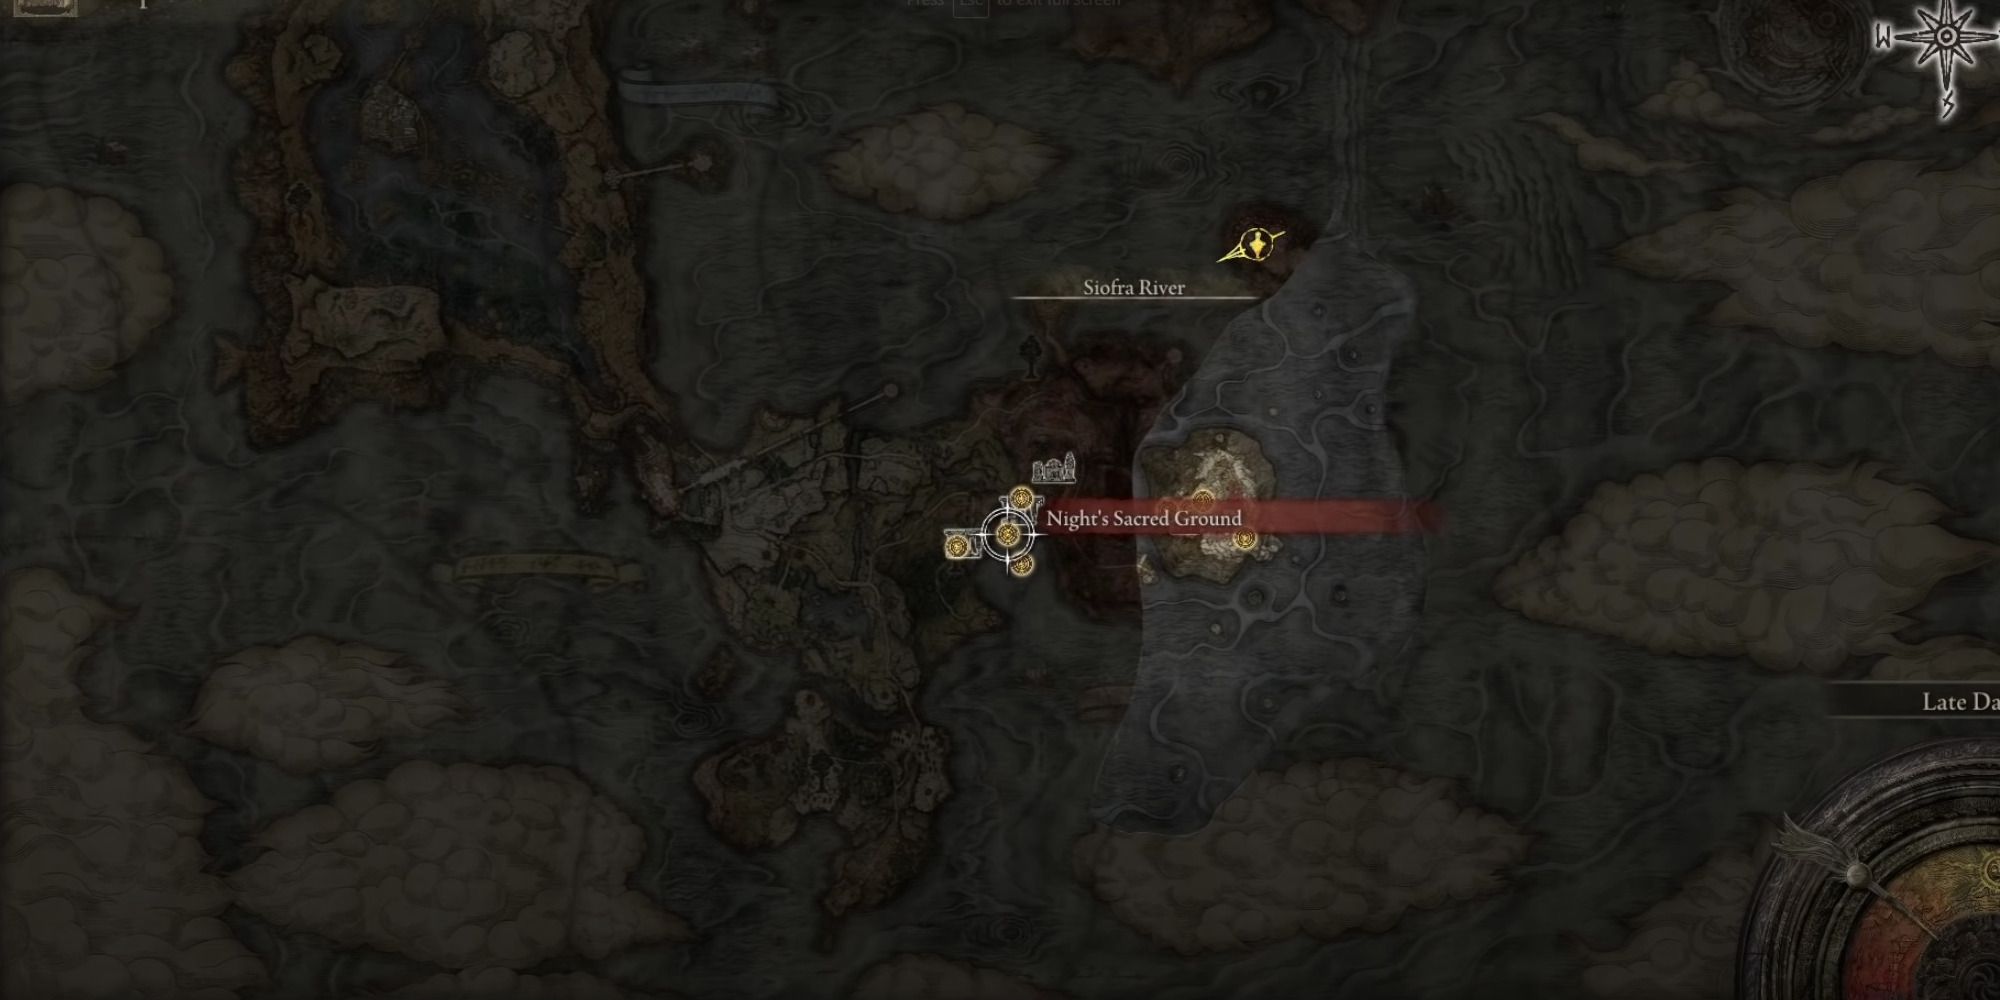 Mimic Tear Location on the Elden Ring Map near the Night's Sacred Ground Site of Grace